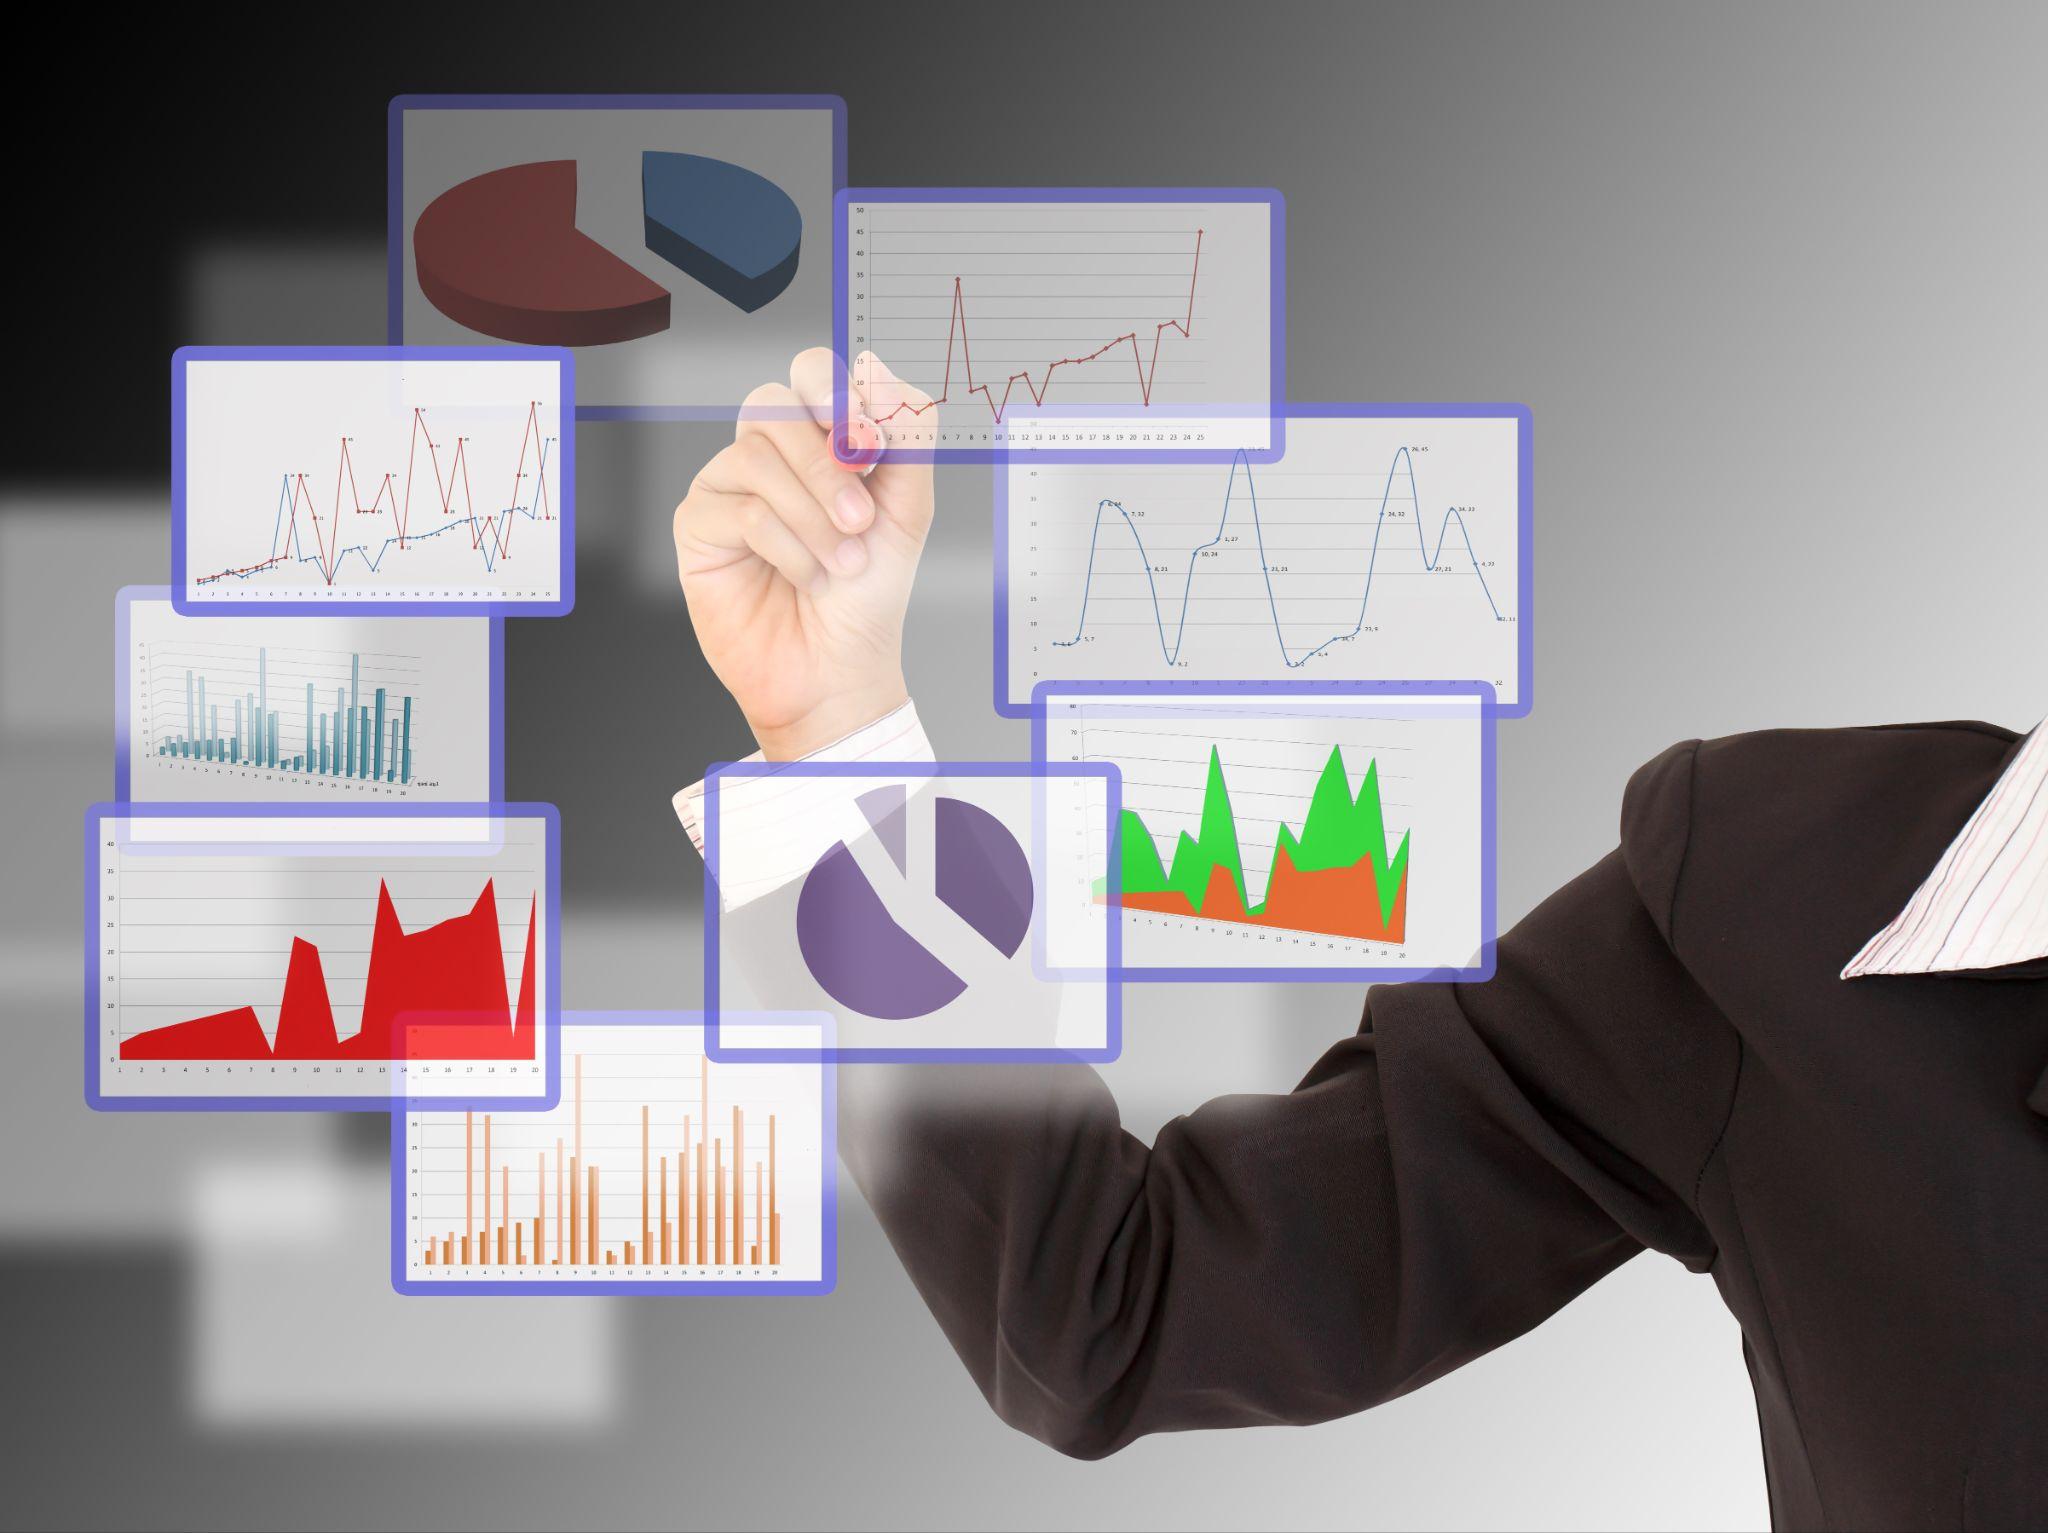 How Does Data Management Increase Efficiency for Business?